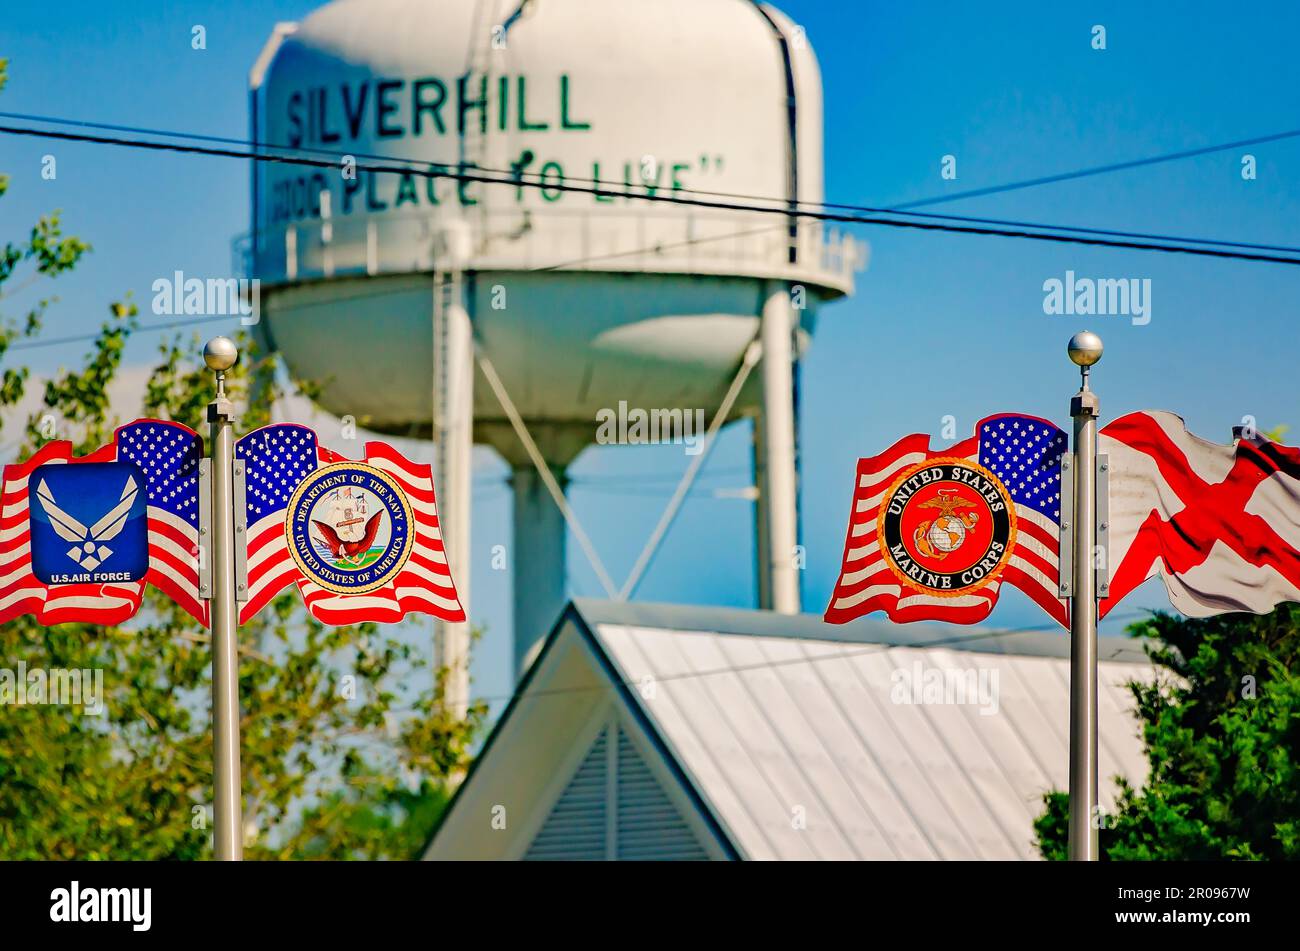 Metal Armed Forces banners are pictured at Silverhill Veterans Memorial in Paul Anderson Park, April 30, 2023, in Silverhill, Alabama. Stock Photo